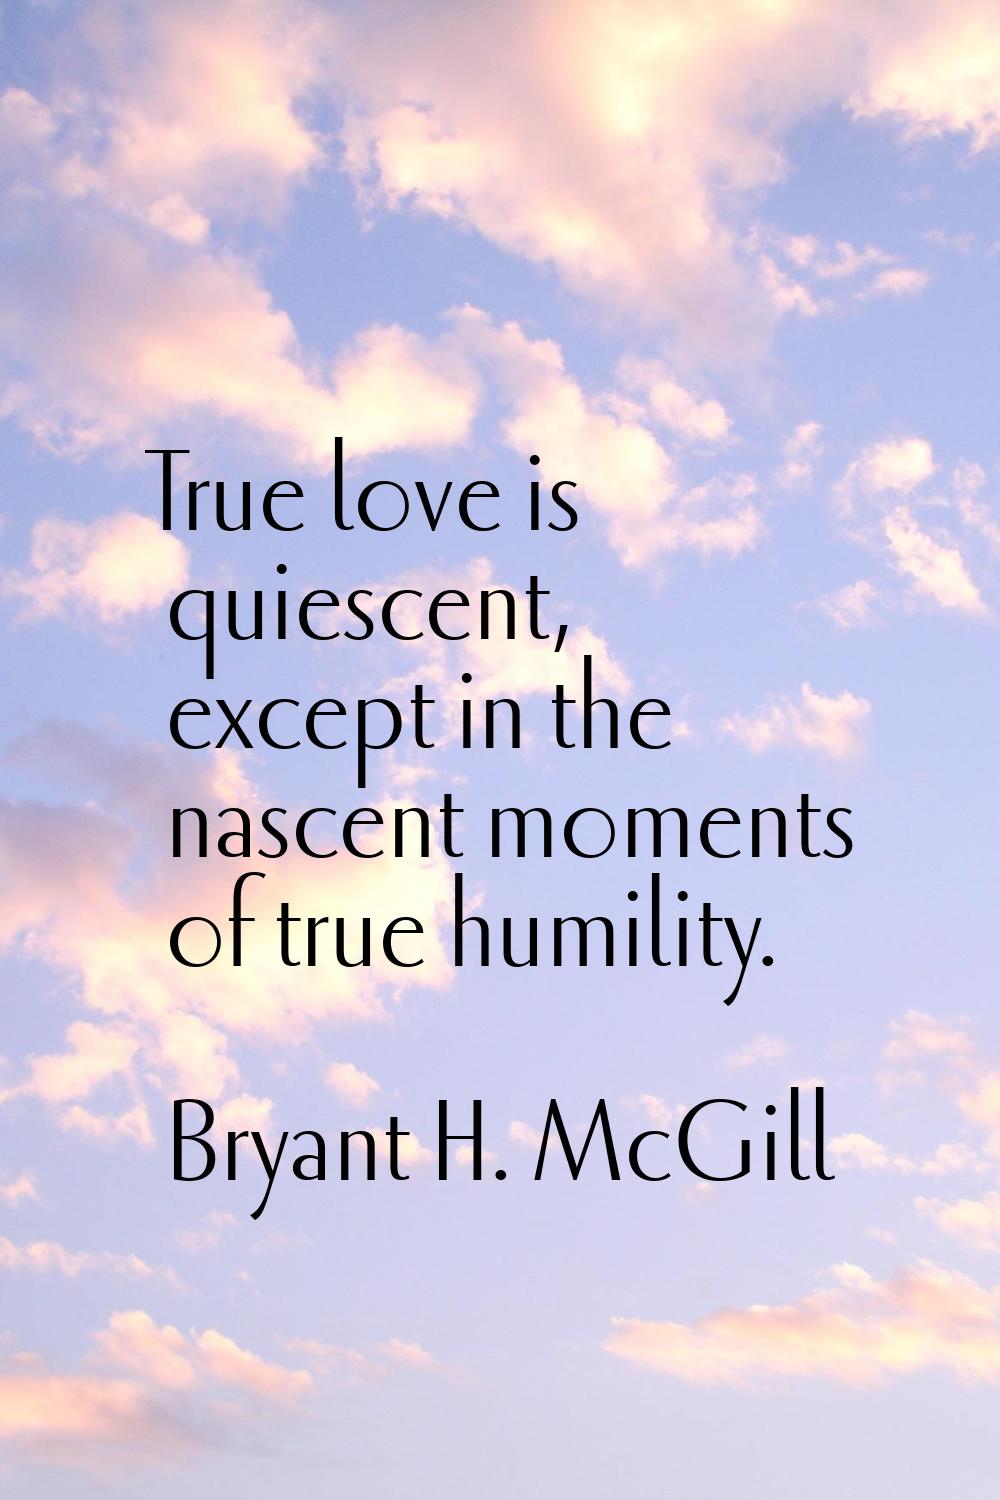 True love is quiescent, except in the nascent moments of true humility.